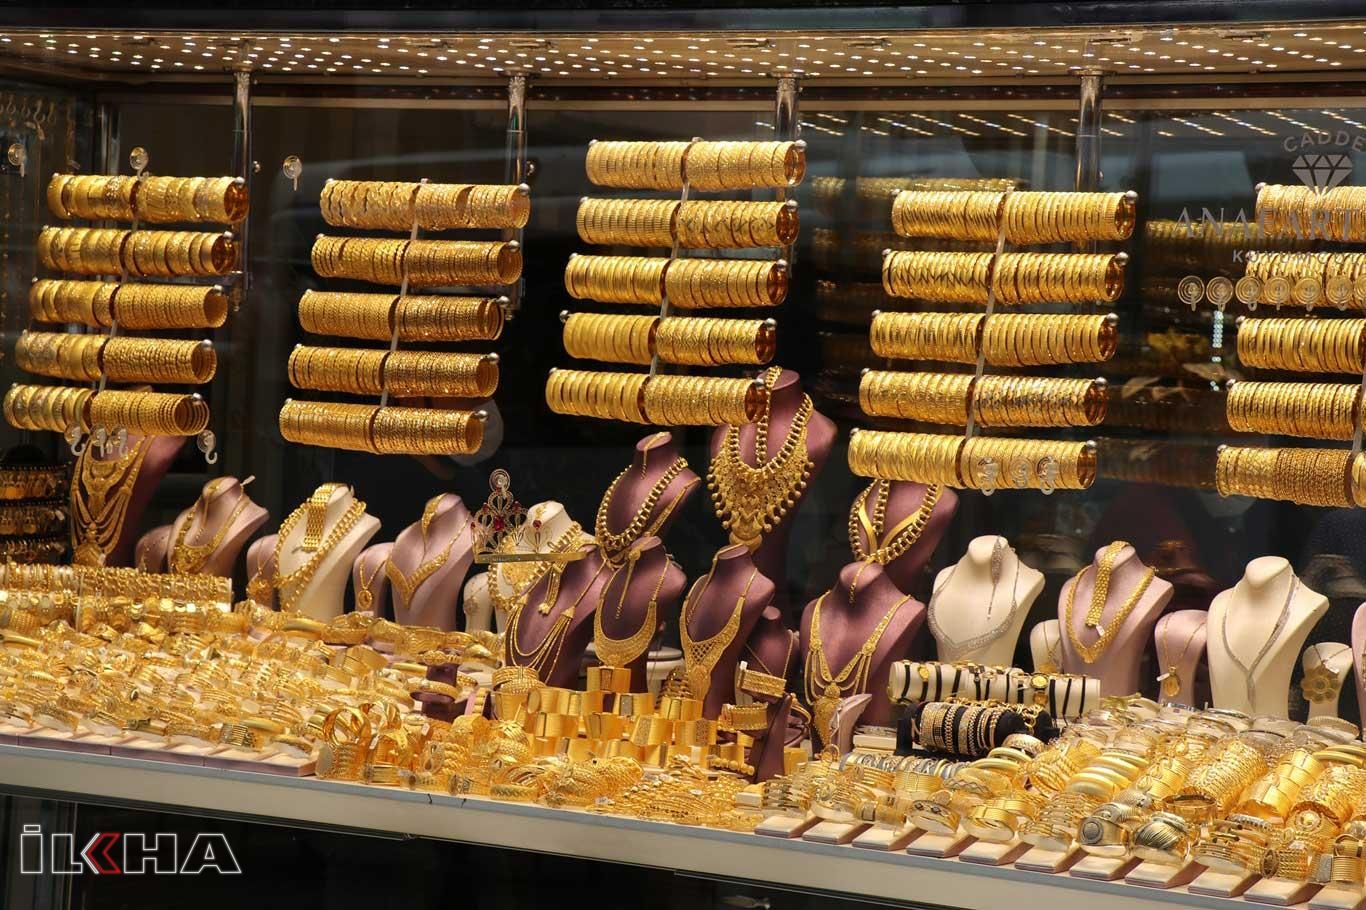 People of Turkey turn deaf ear to Erdoğan’s call to sell gold, foreign currencies 1